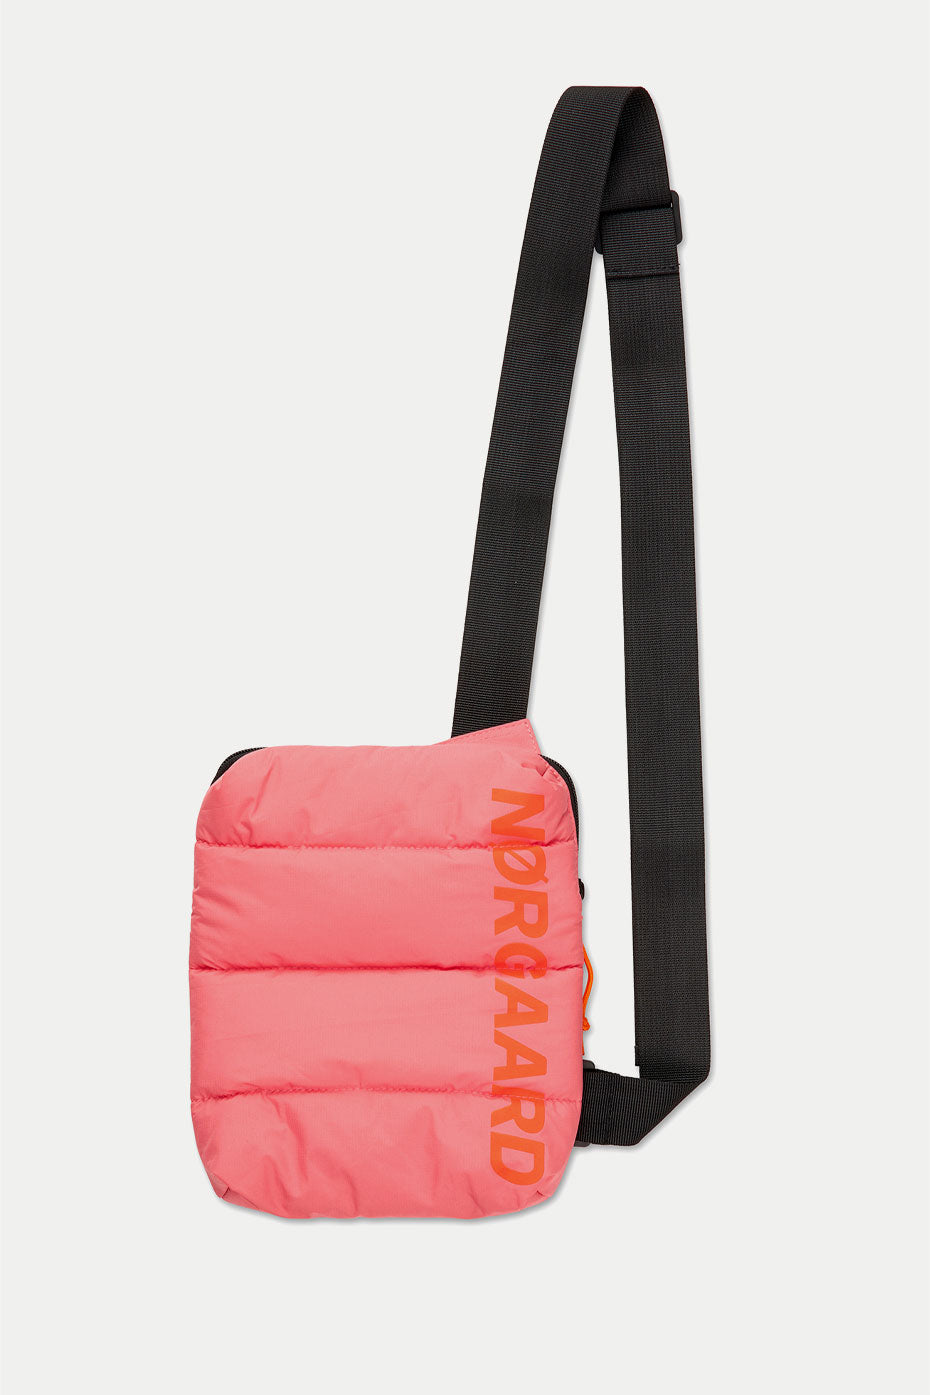 Mads Norgaard Shell Pink Recycle Fendor Crossbody Bag